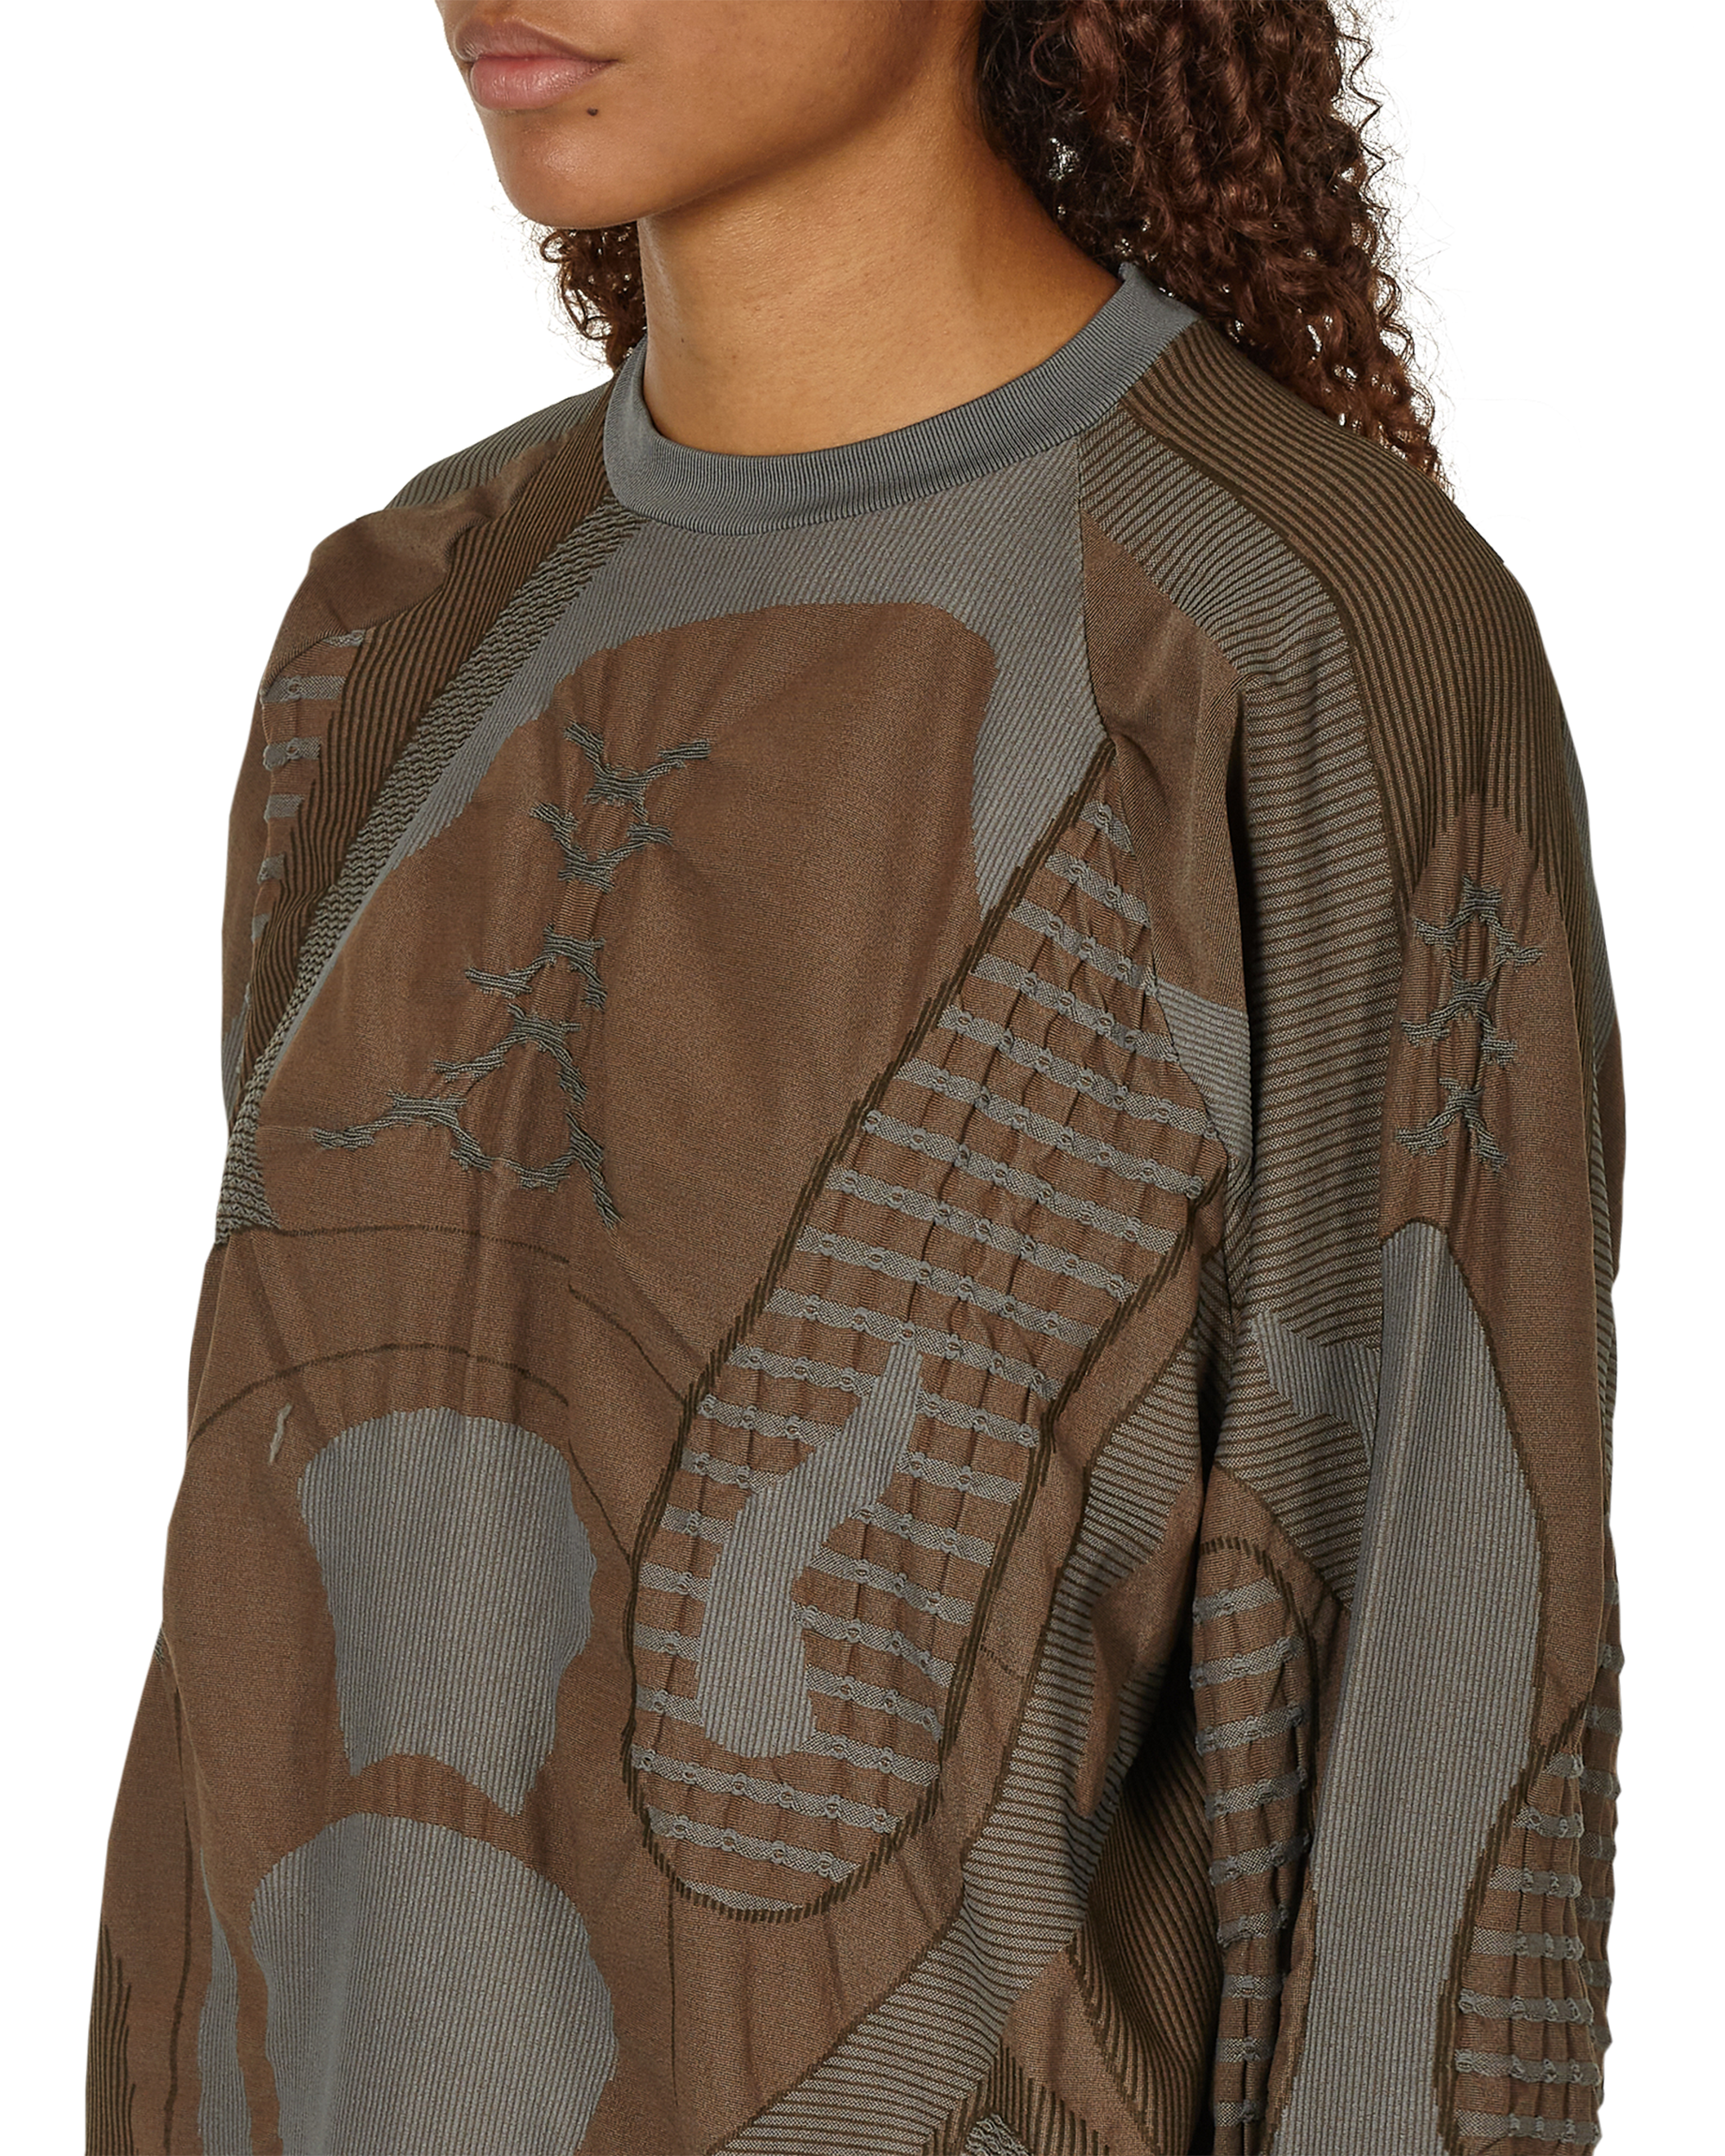 Oversize 3D Knit - Brown / Grey